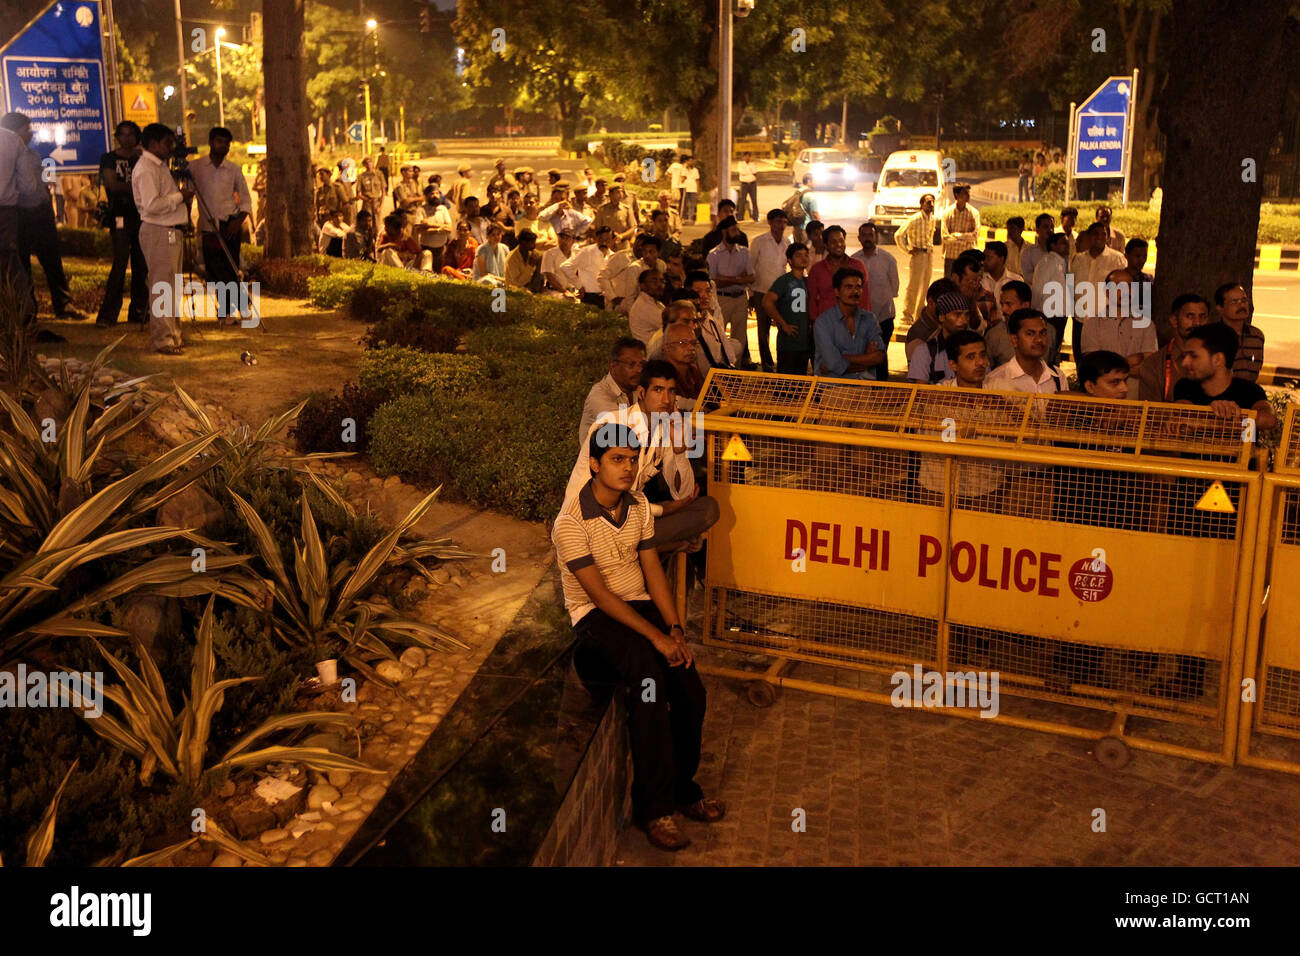 People are held behind a police barrier as they watch the 2010 Commonwealth Games opening ceremony outside the Jawaharlal Nehru Stadium in New Delhi, India. Stock Photo